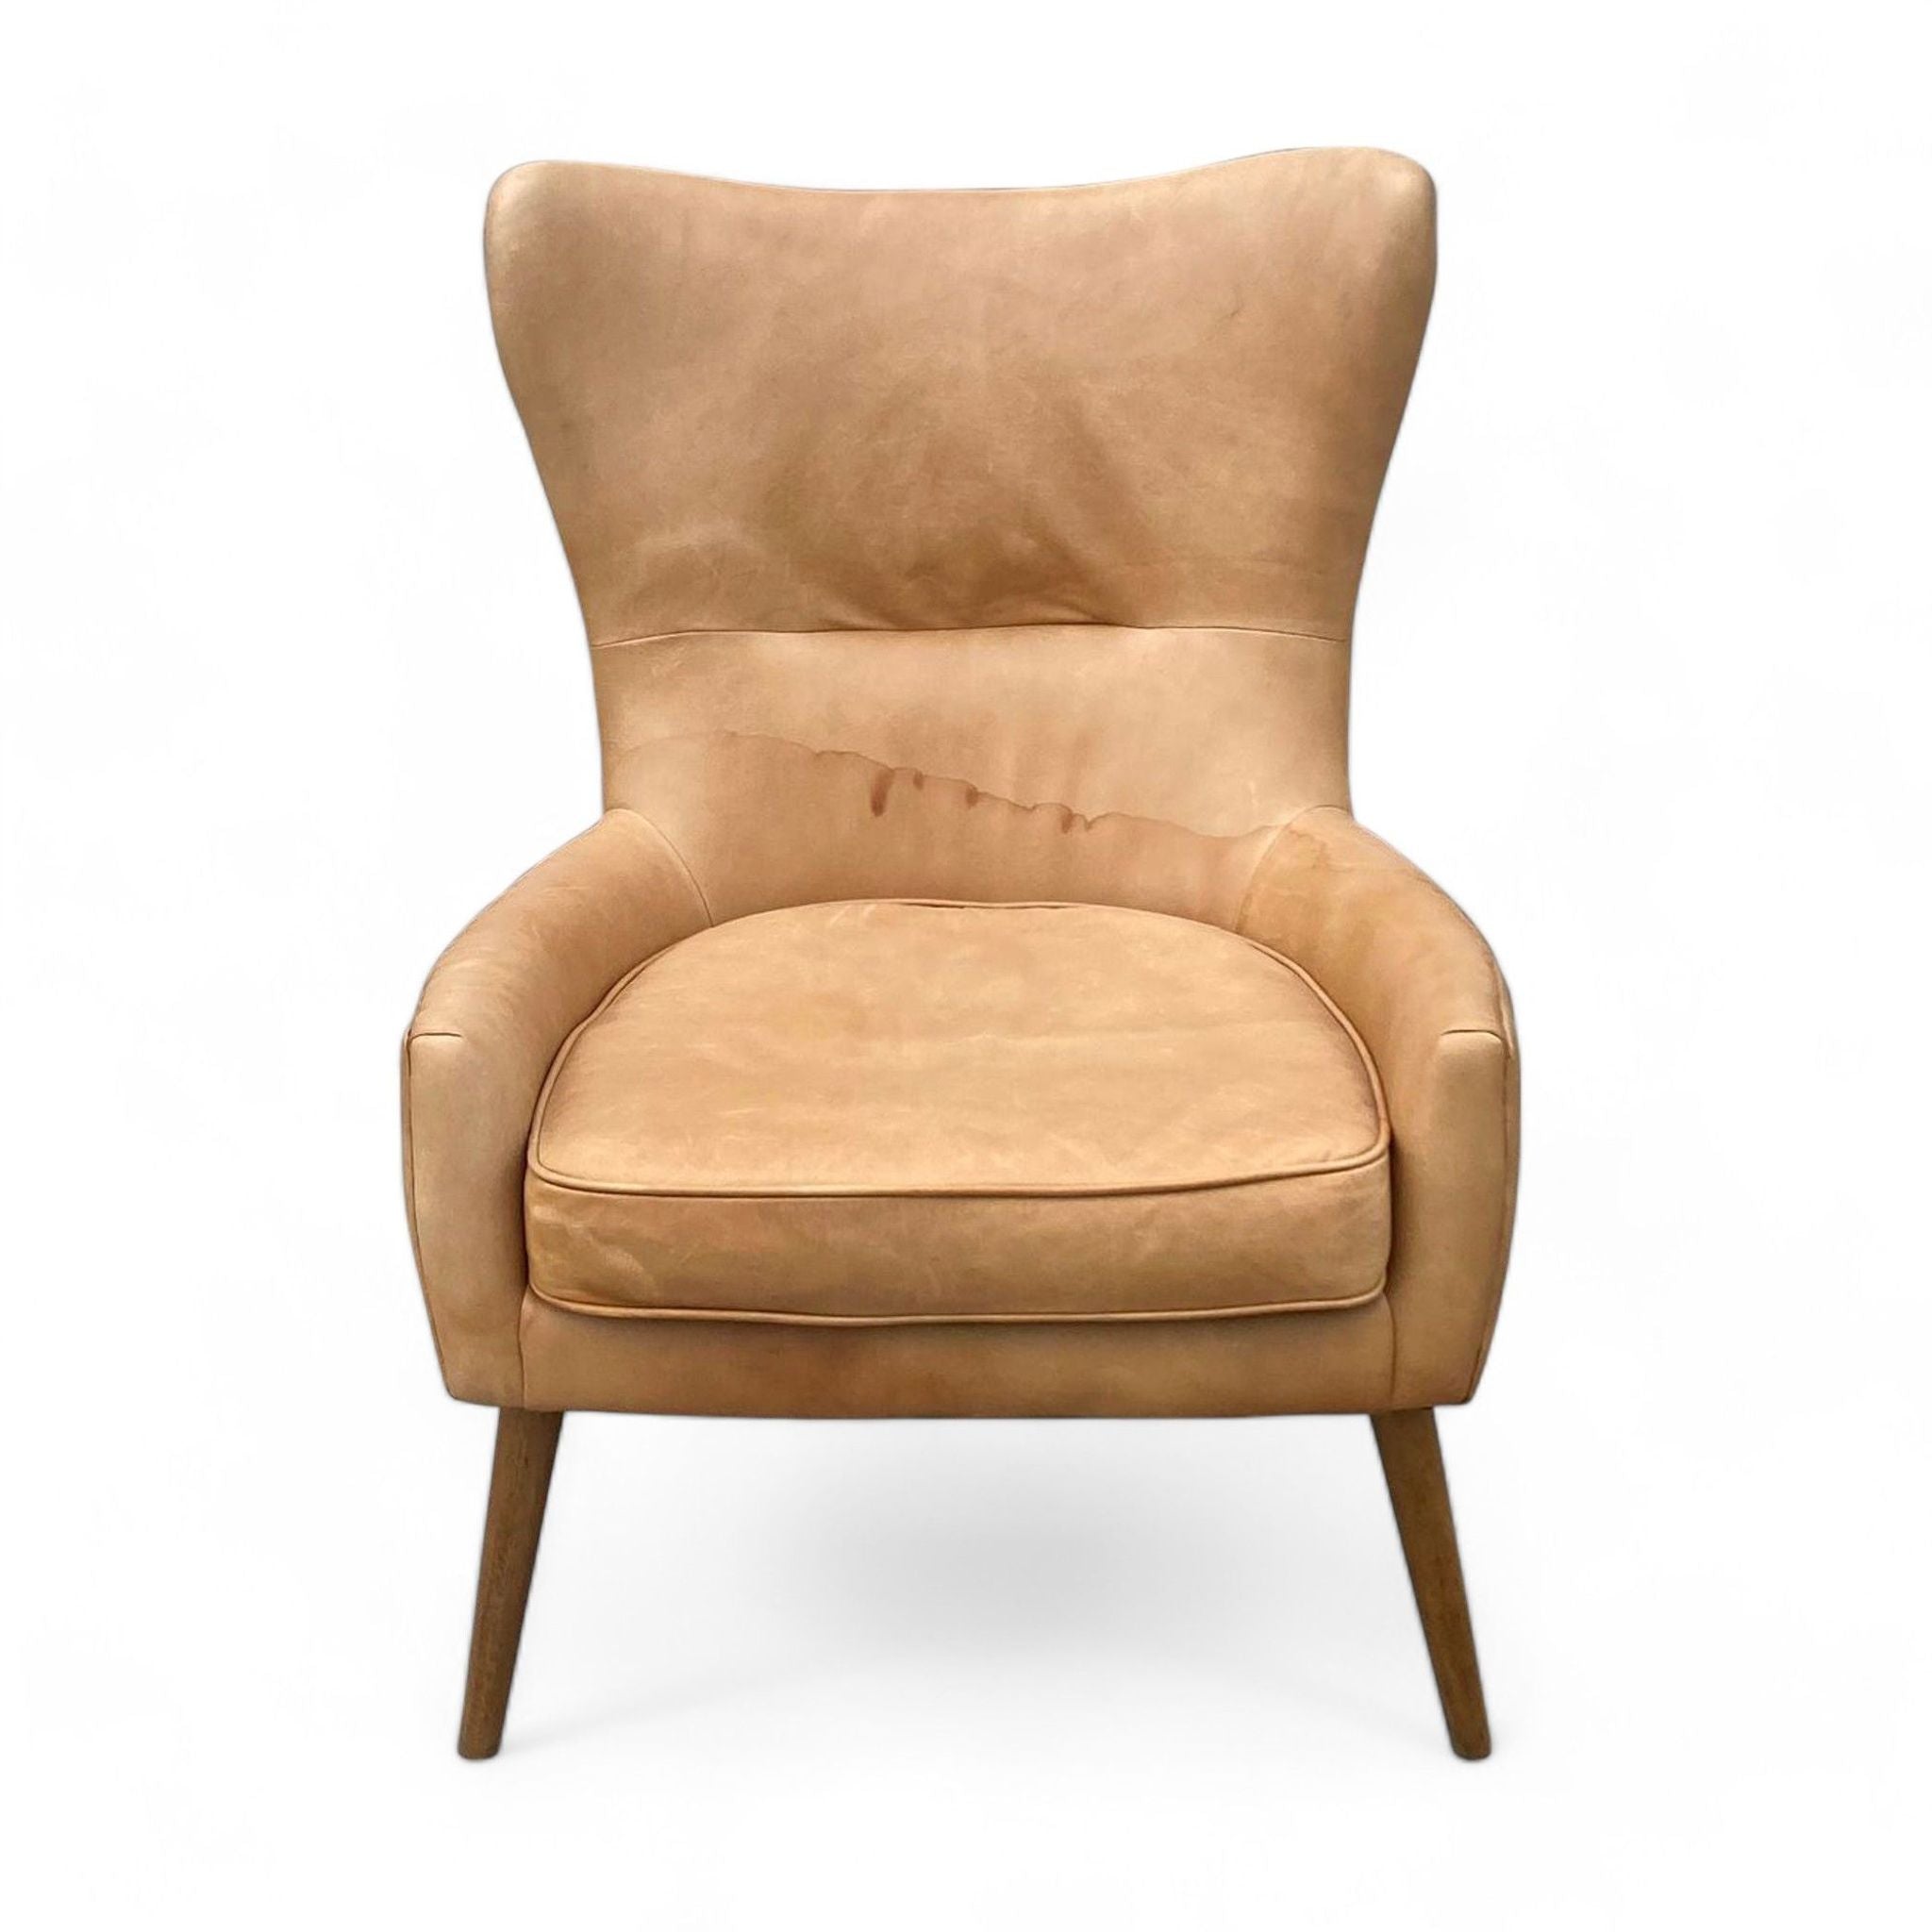 Tan leather lounge chair by West Elm with angled wooden legs and a high backrest.